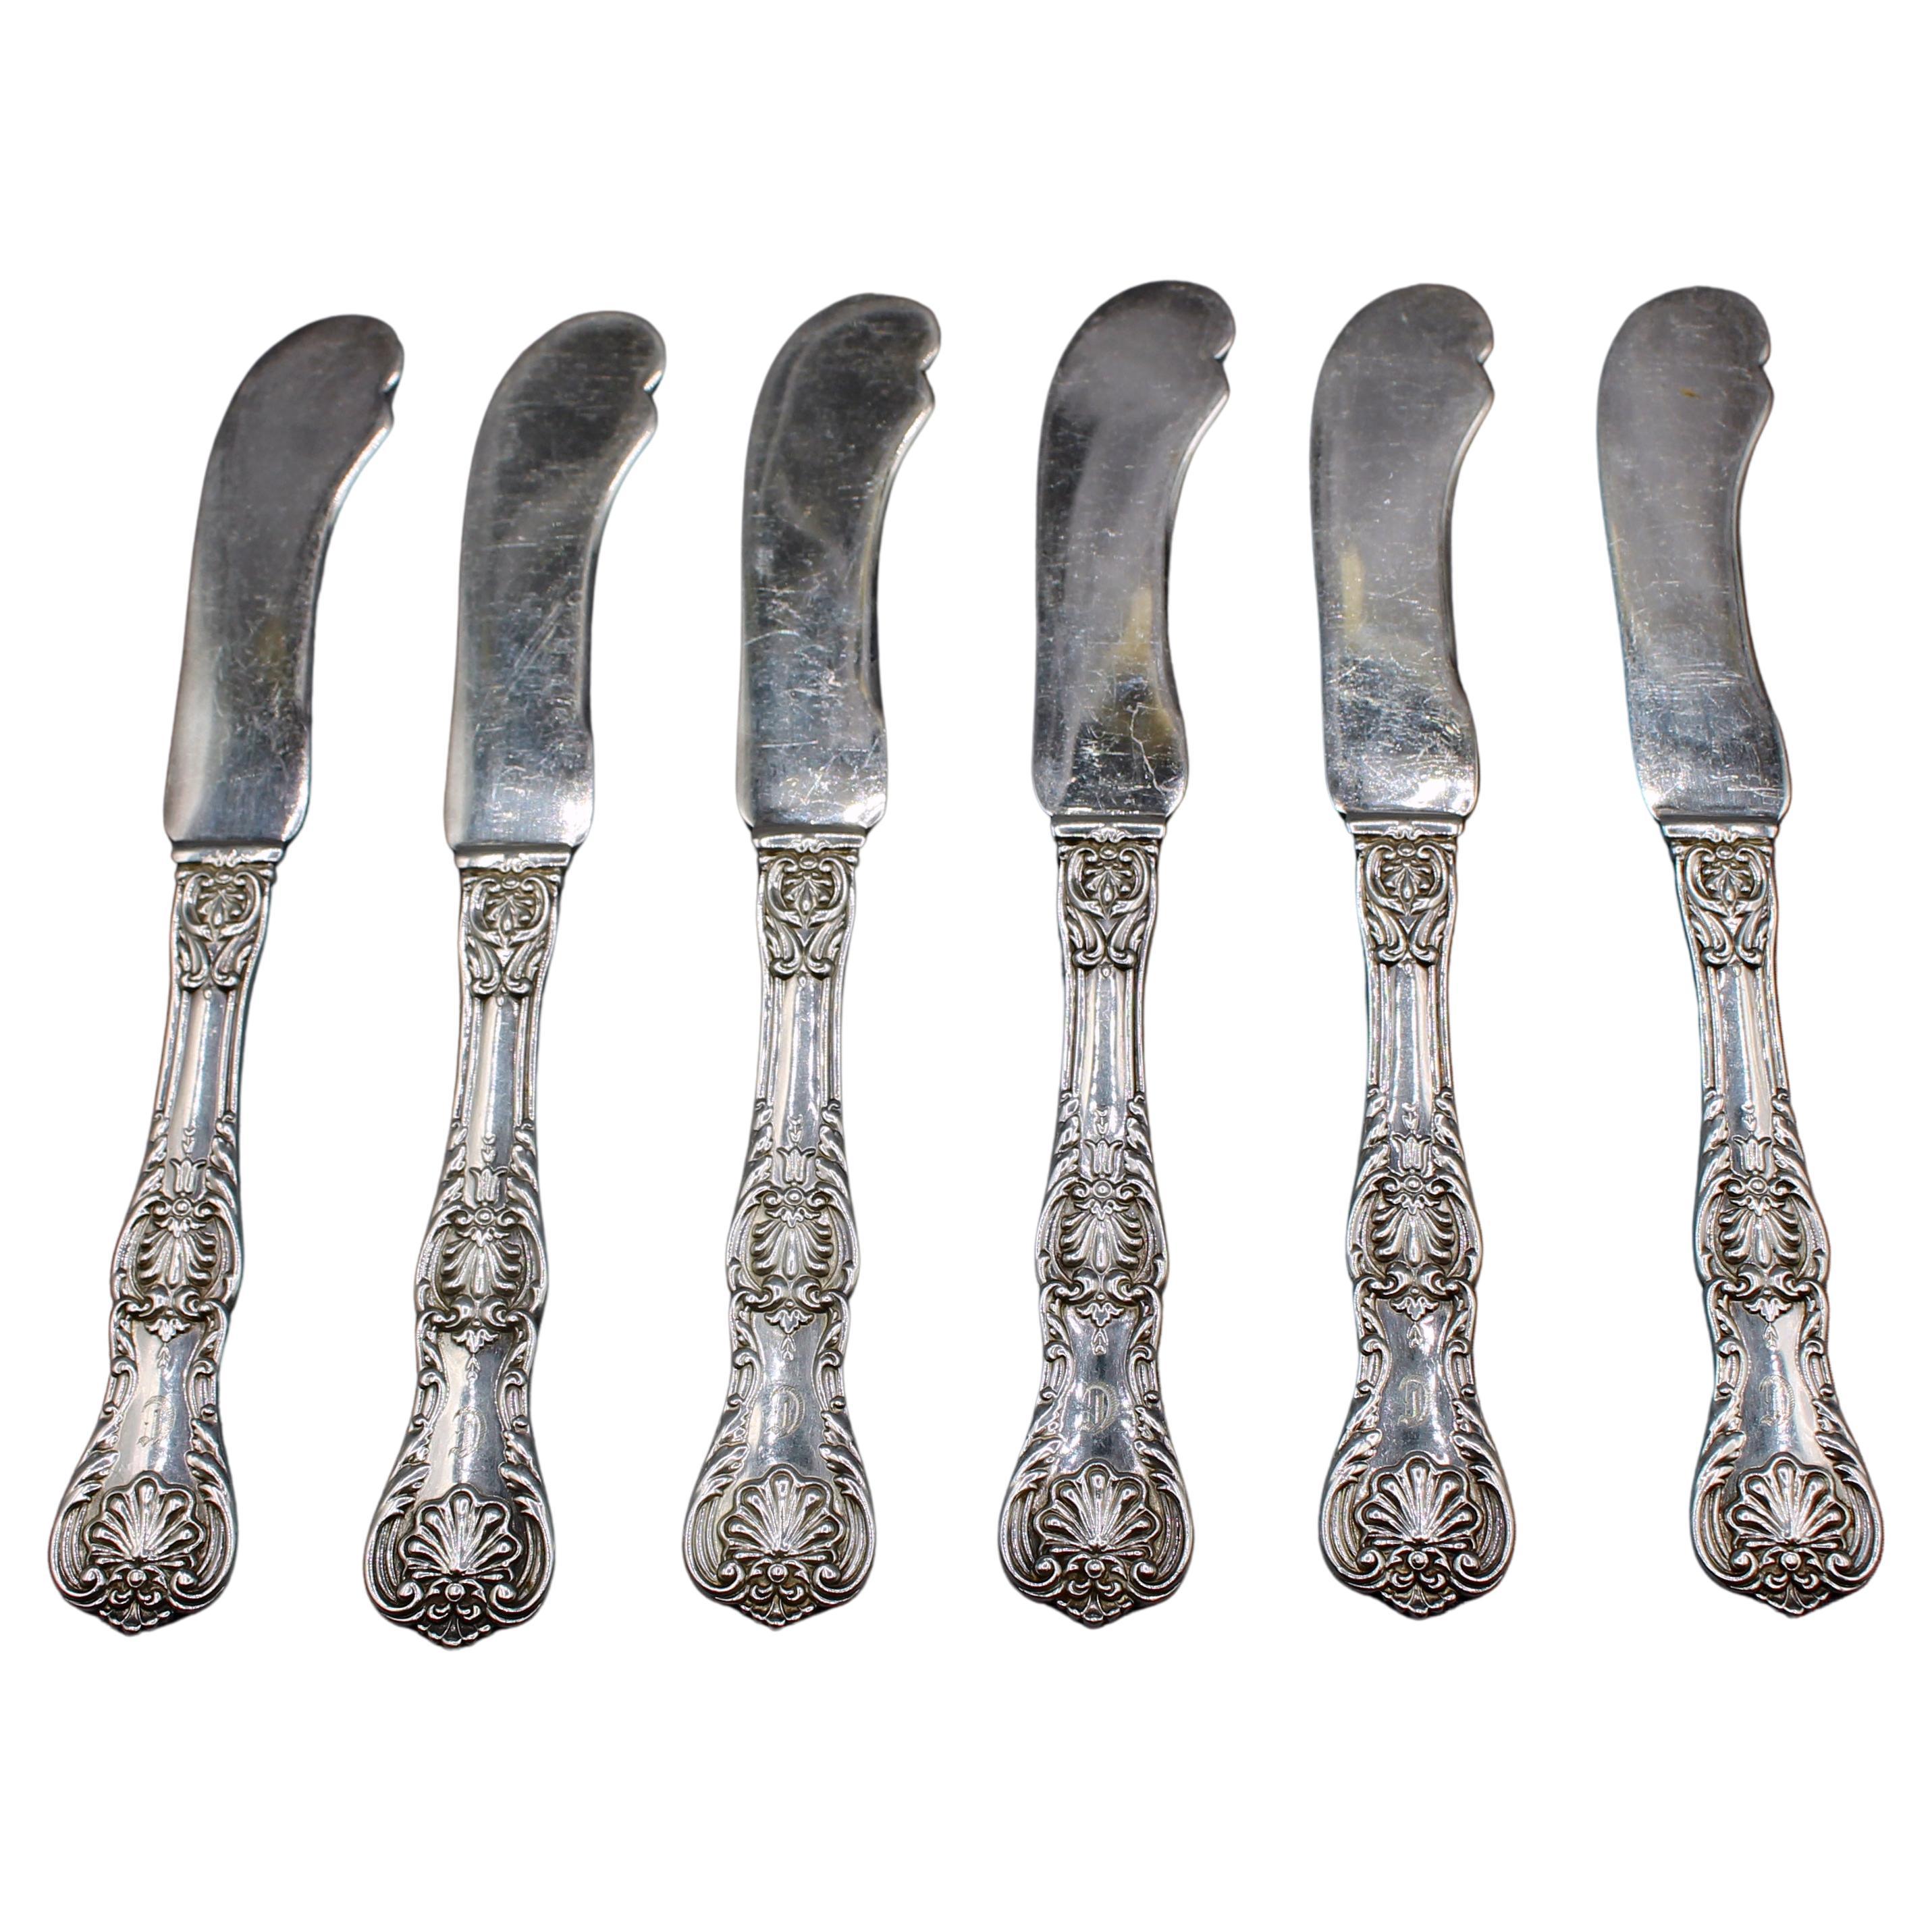 c. 1930s Set of Six "King George" Sterling Silver Butter Spreaders by Gorham